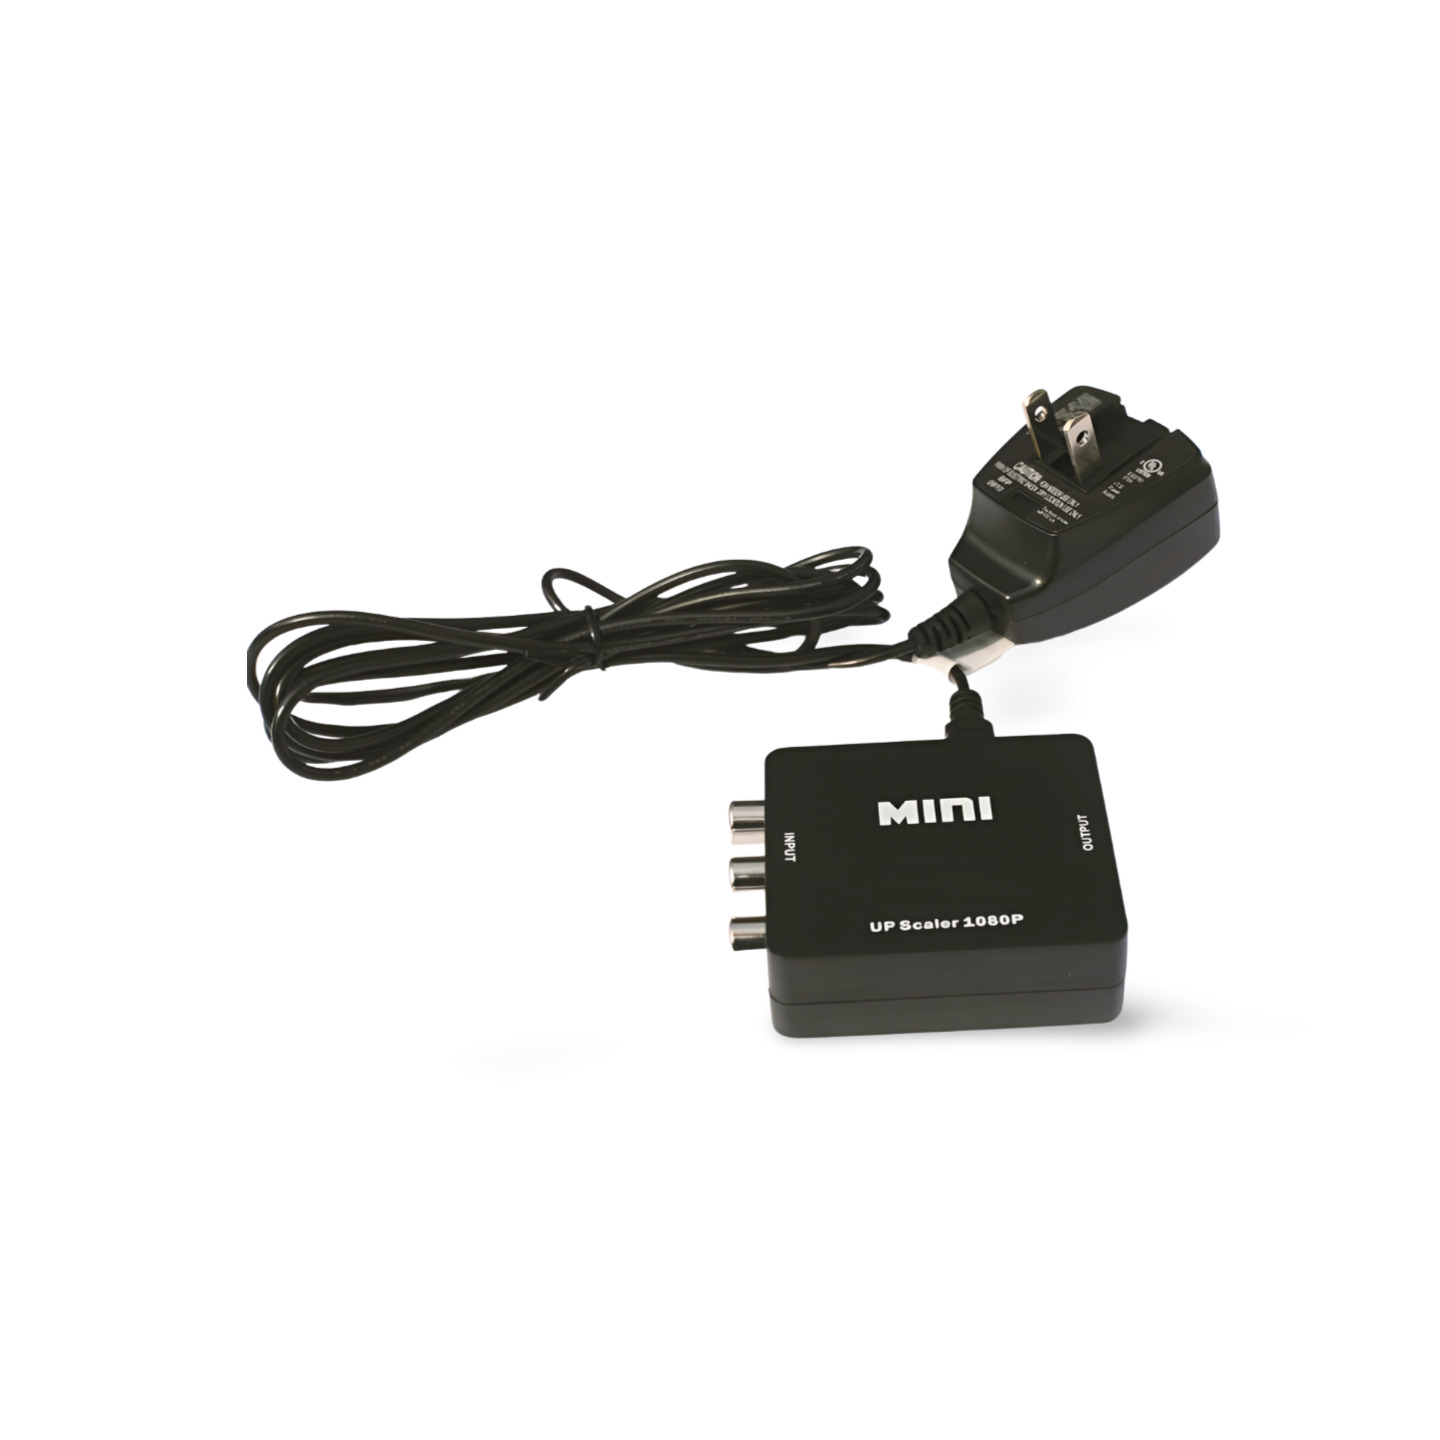 1in Composite RCA to HDMI Adapter Box Up Scaler 1080P with Power Supply - Black